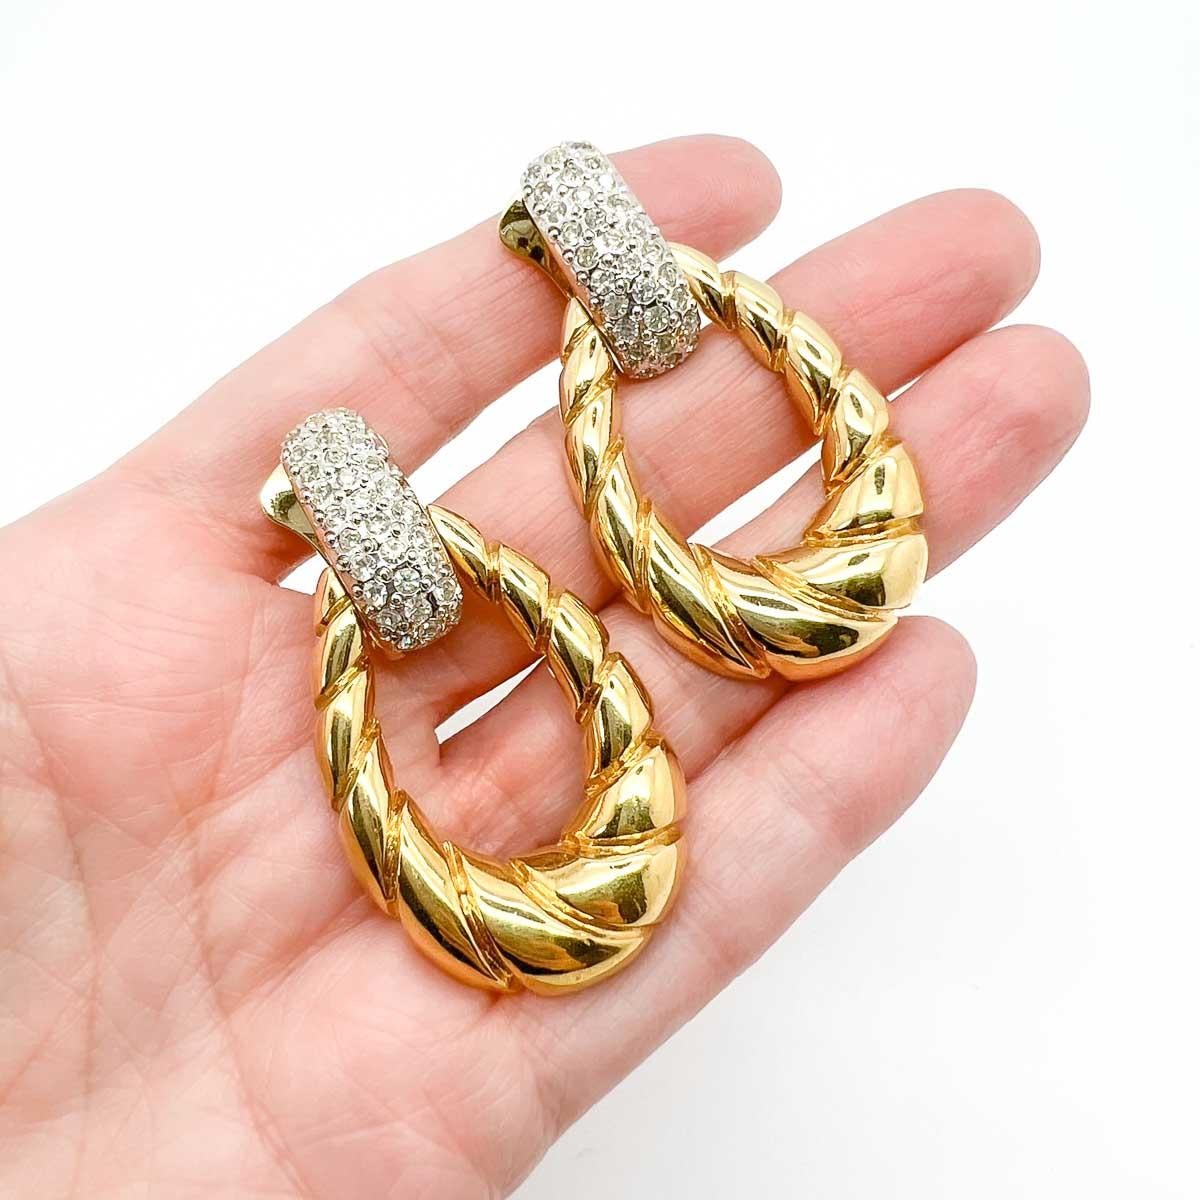 Vintage Doorknocker Earrings. An unsigned beauty. A rare treasure. Just because a jewel doesn’t carry a designer name, doesn’t mean it isn't coveted. The unsigned beauties in our collection are sourced specifically by Jennifer for their standout